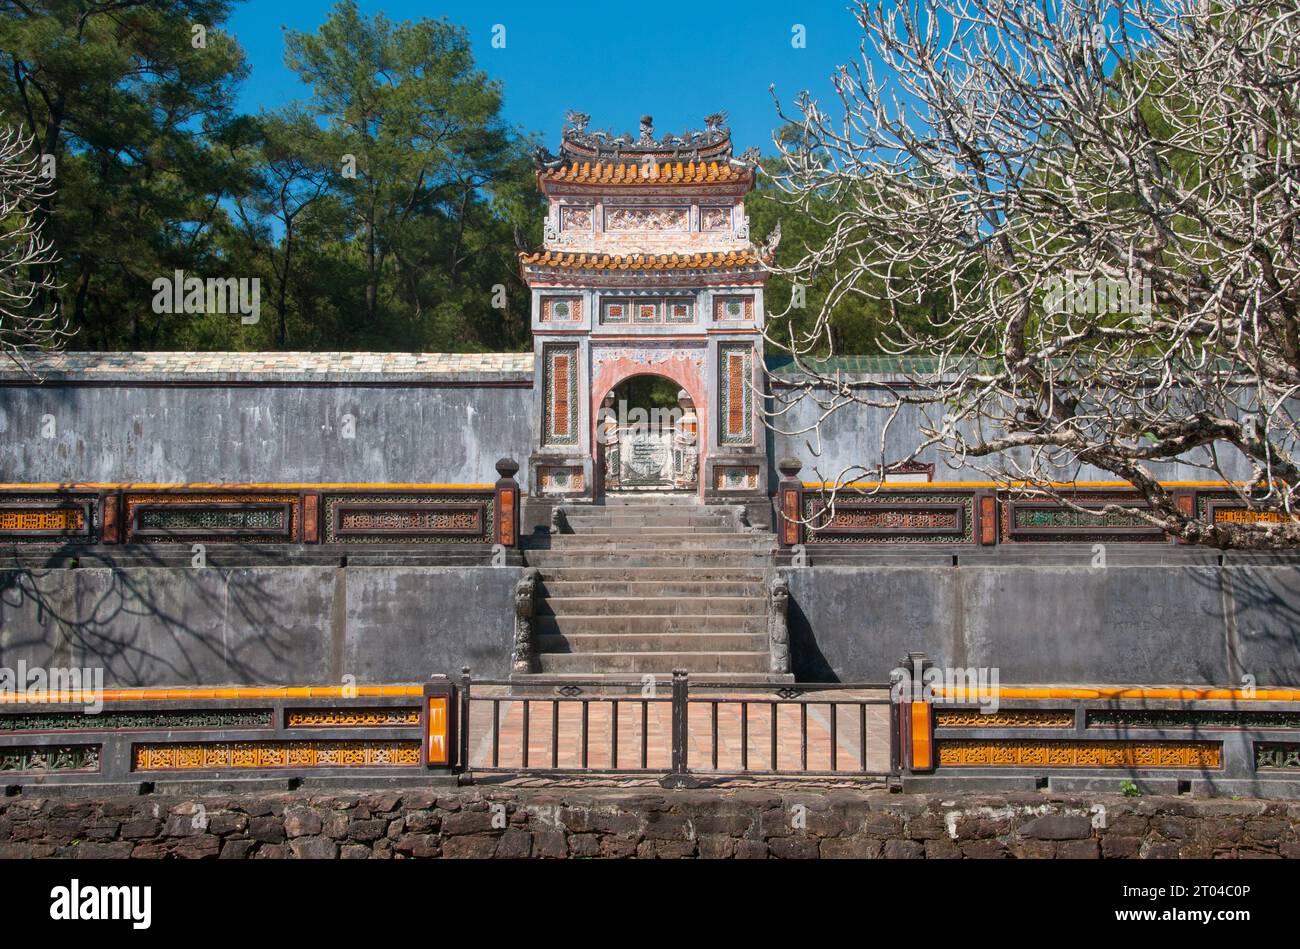 Vietnam: Gateway leading to the Tomb of Emperor Tu Duc, Hue. Emperor Tự Đức (22 September 1829 – 17 July 1883) (full name: Nguyễn Phúc Hồng Nhậm, also Nguyen Phuc Thi) was the fourth emperor of the Nguyễn Dynasty of Vietnam and reigned from 1847–1883.  The son of Emperor Thiệu Trị, Prince Nguyễn Phúc Hồng Nhậm succeeded his father on the throne, with the reigning title of Tự Đức, but family troubles caused his era to have a violent start. Thiệu Trị had passed over his more moderate eldest son, Hồng Bảo, to give the throne to Tự Đức. Stock Photo